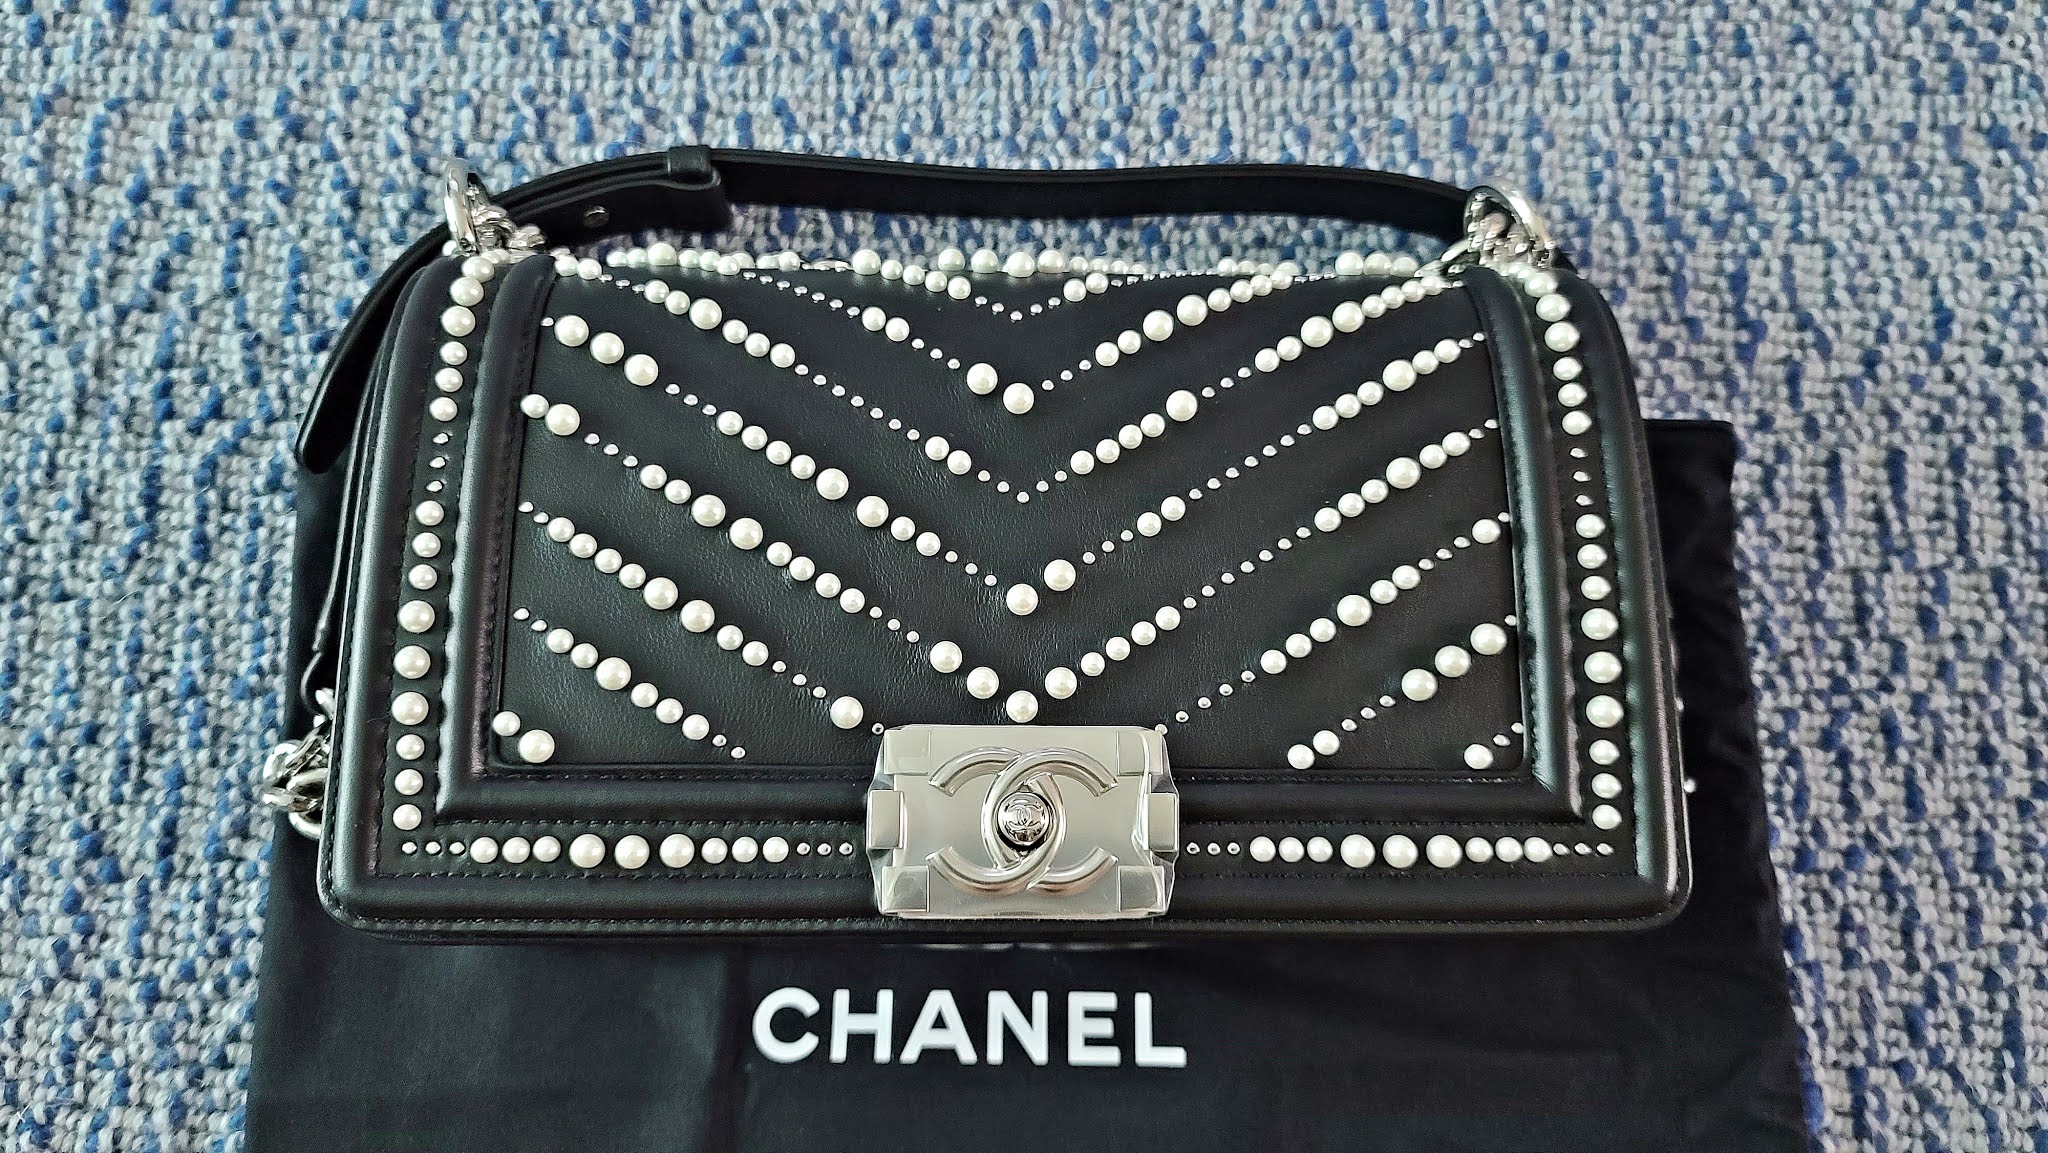 MY FIRST CHANEL HANDBAG UNBOXING 2020